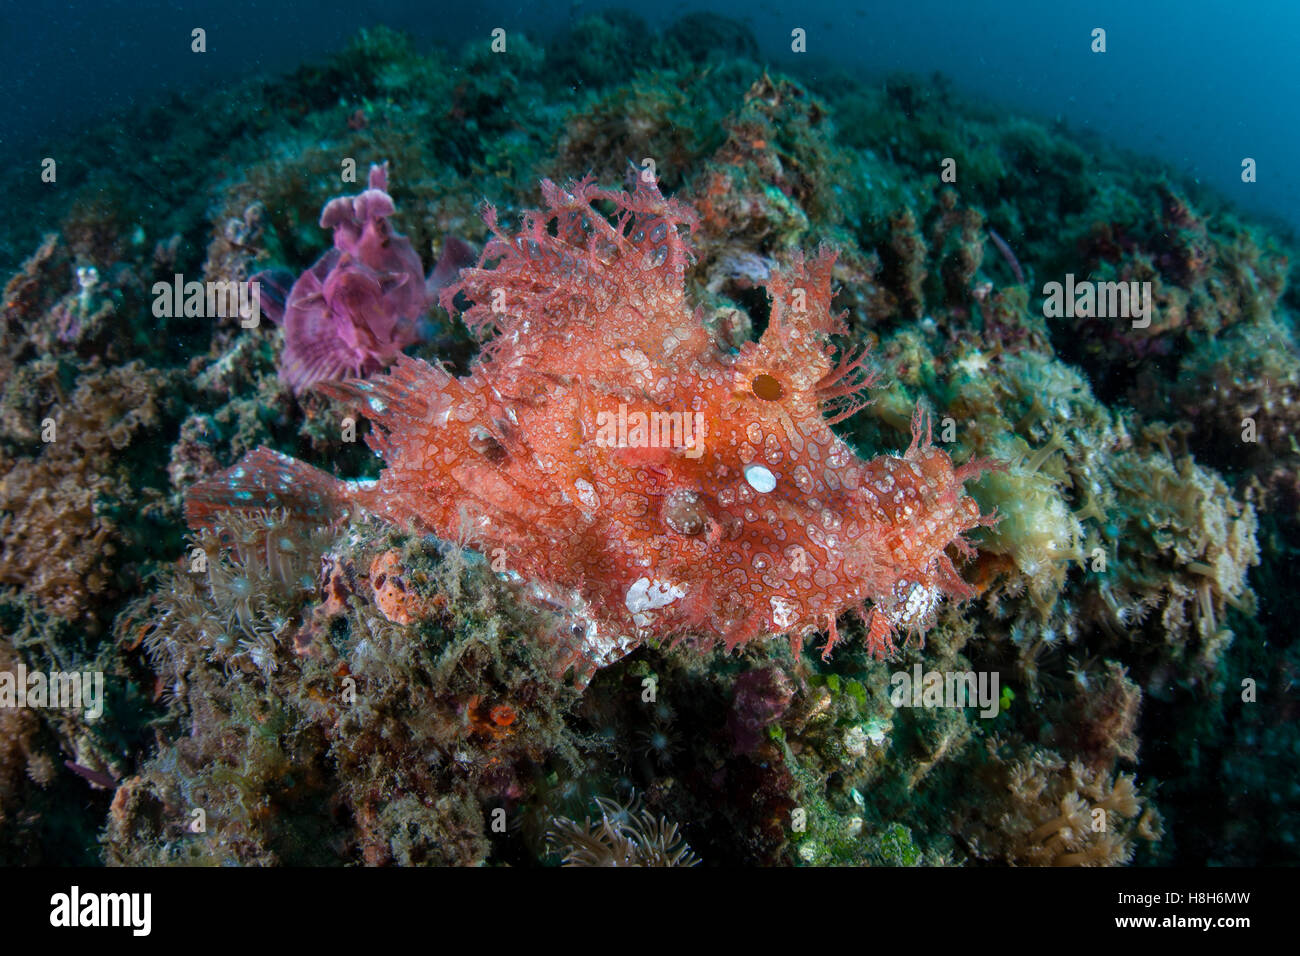 A rare Paddle flap scorpionfish and Lacy scorpionfish (Rhinopias spp.) lie together on the seafloor of Lembeh Strait, Indonesia. Stock Photo